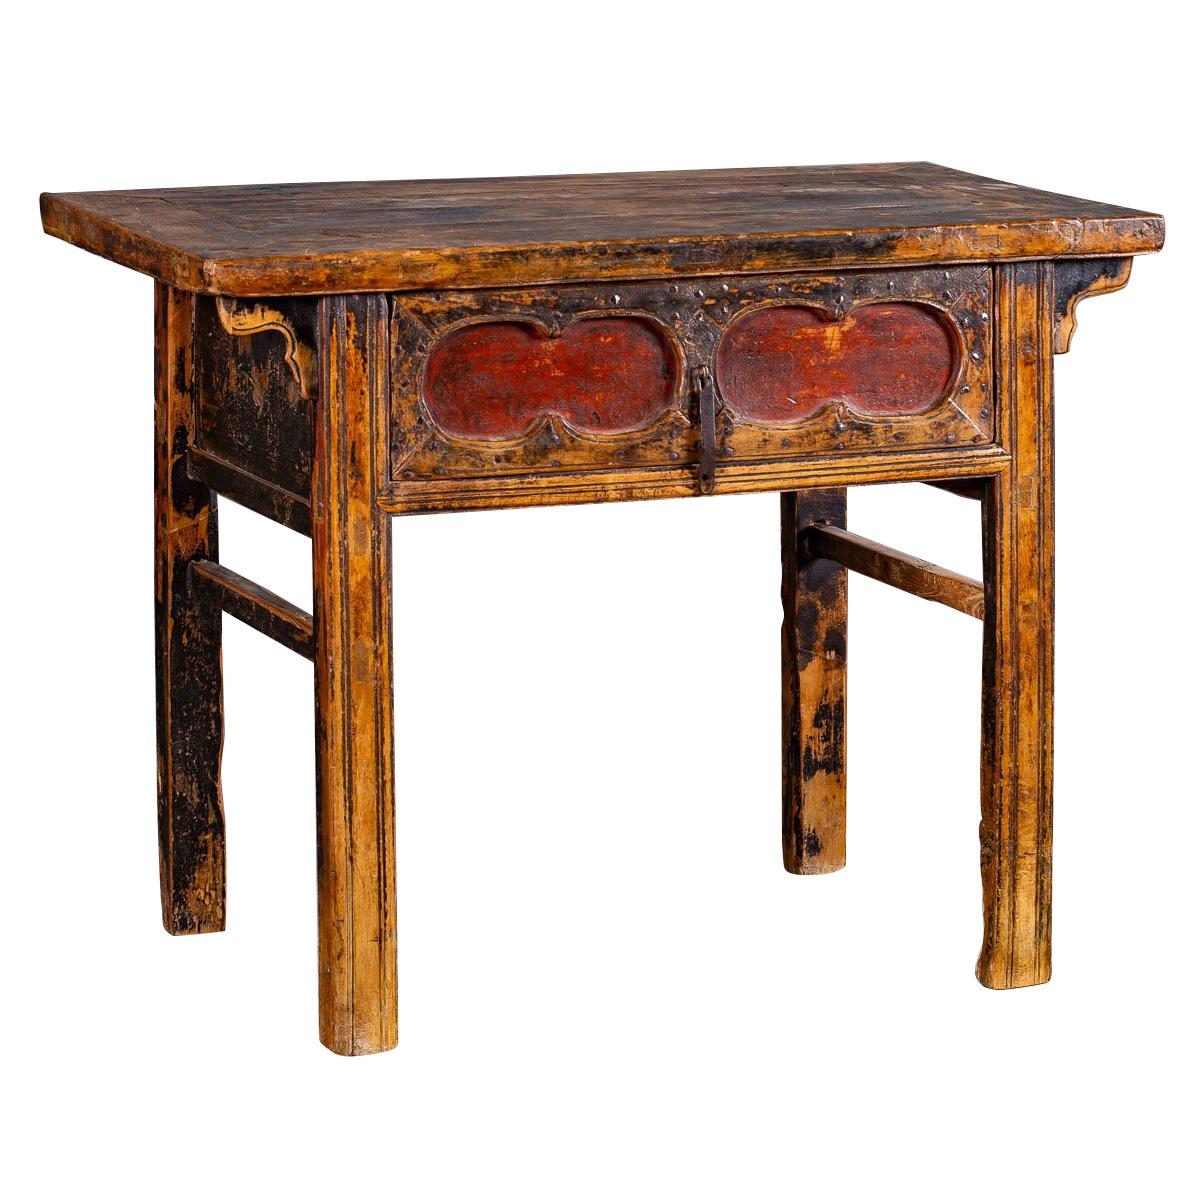 Antique Chinese Table Long Drawer Kaung Hsu Period circa 1875 For Sale